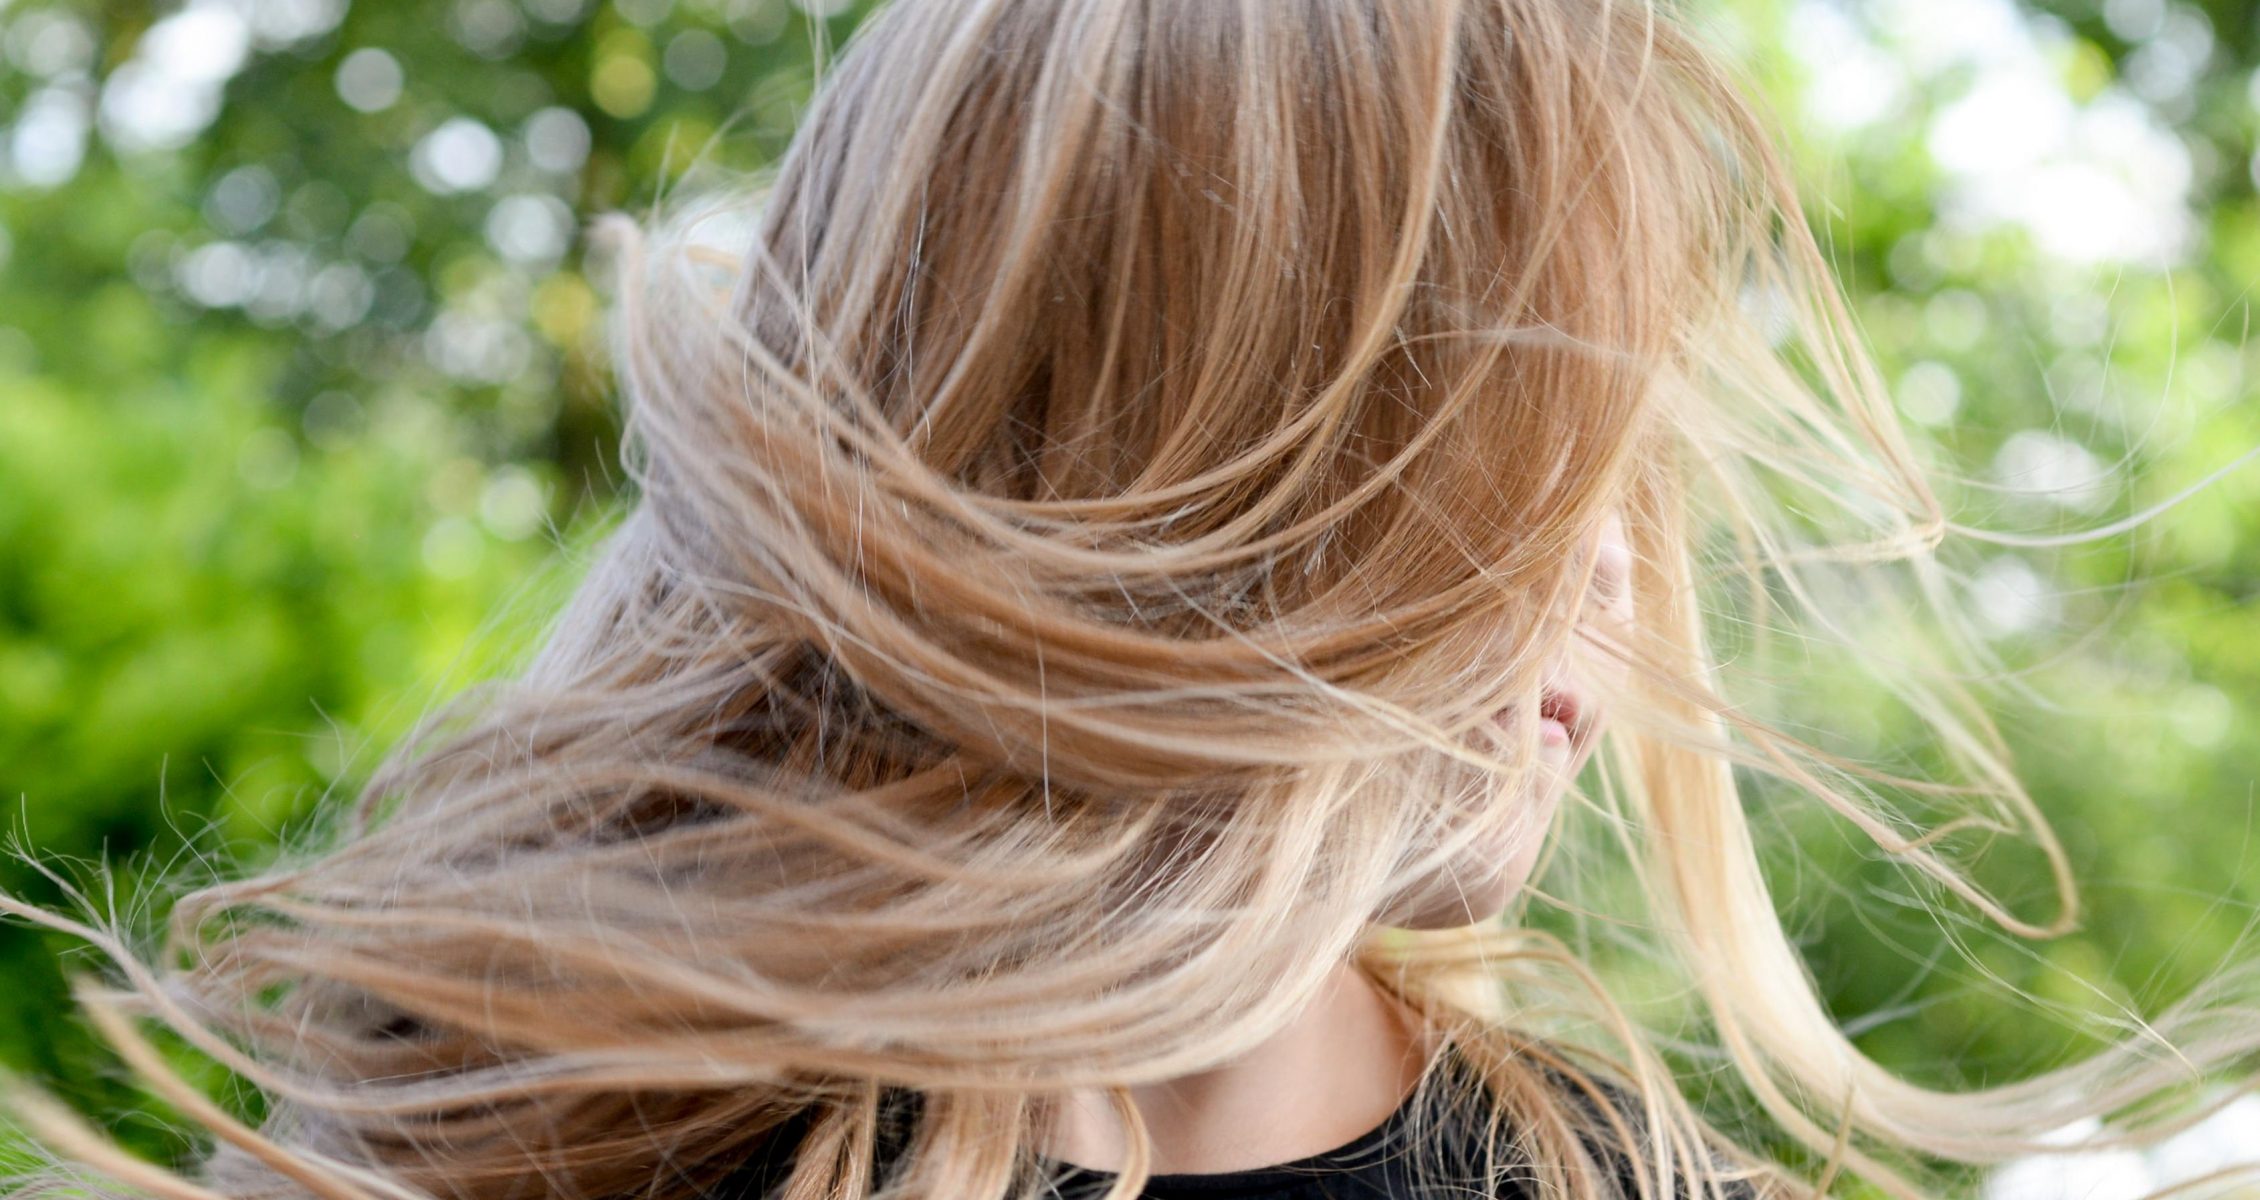 4 Pro Tips For Going From Dark To Blonde Hair Without Damage